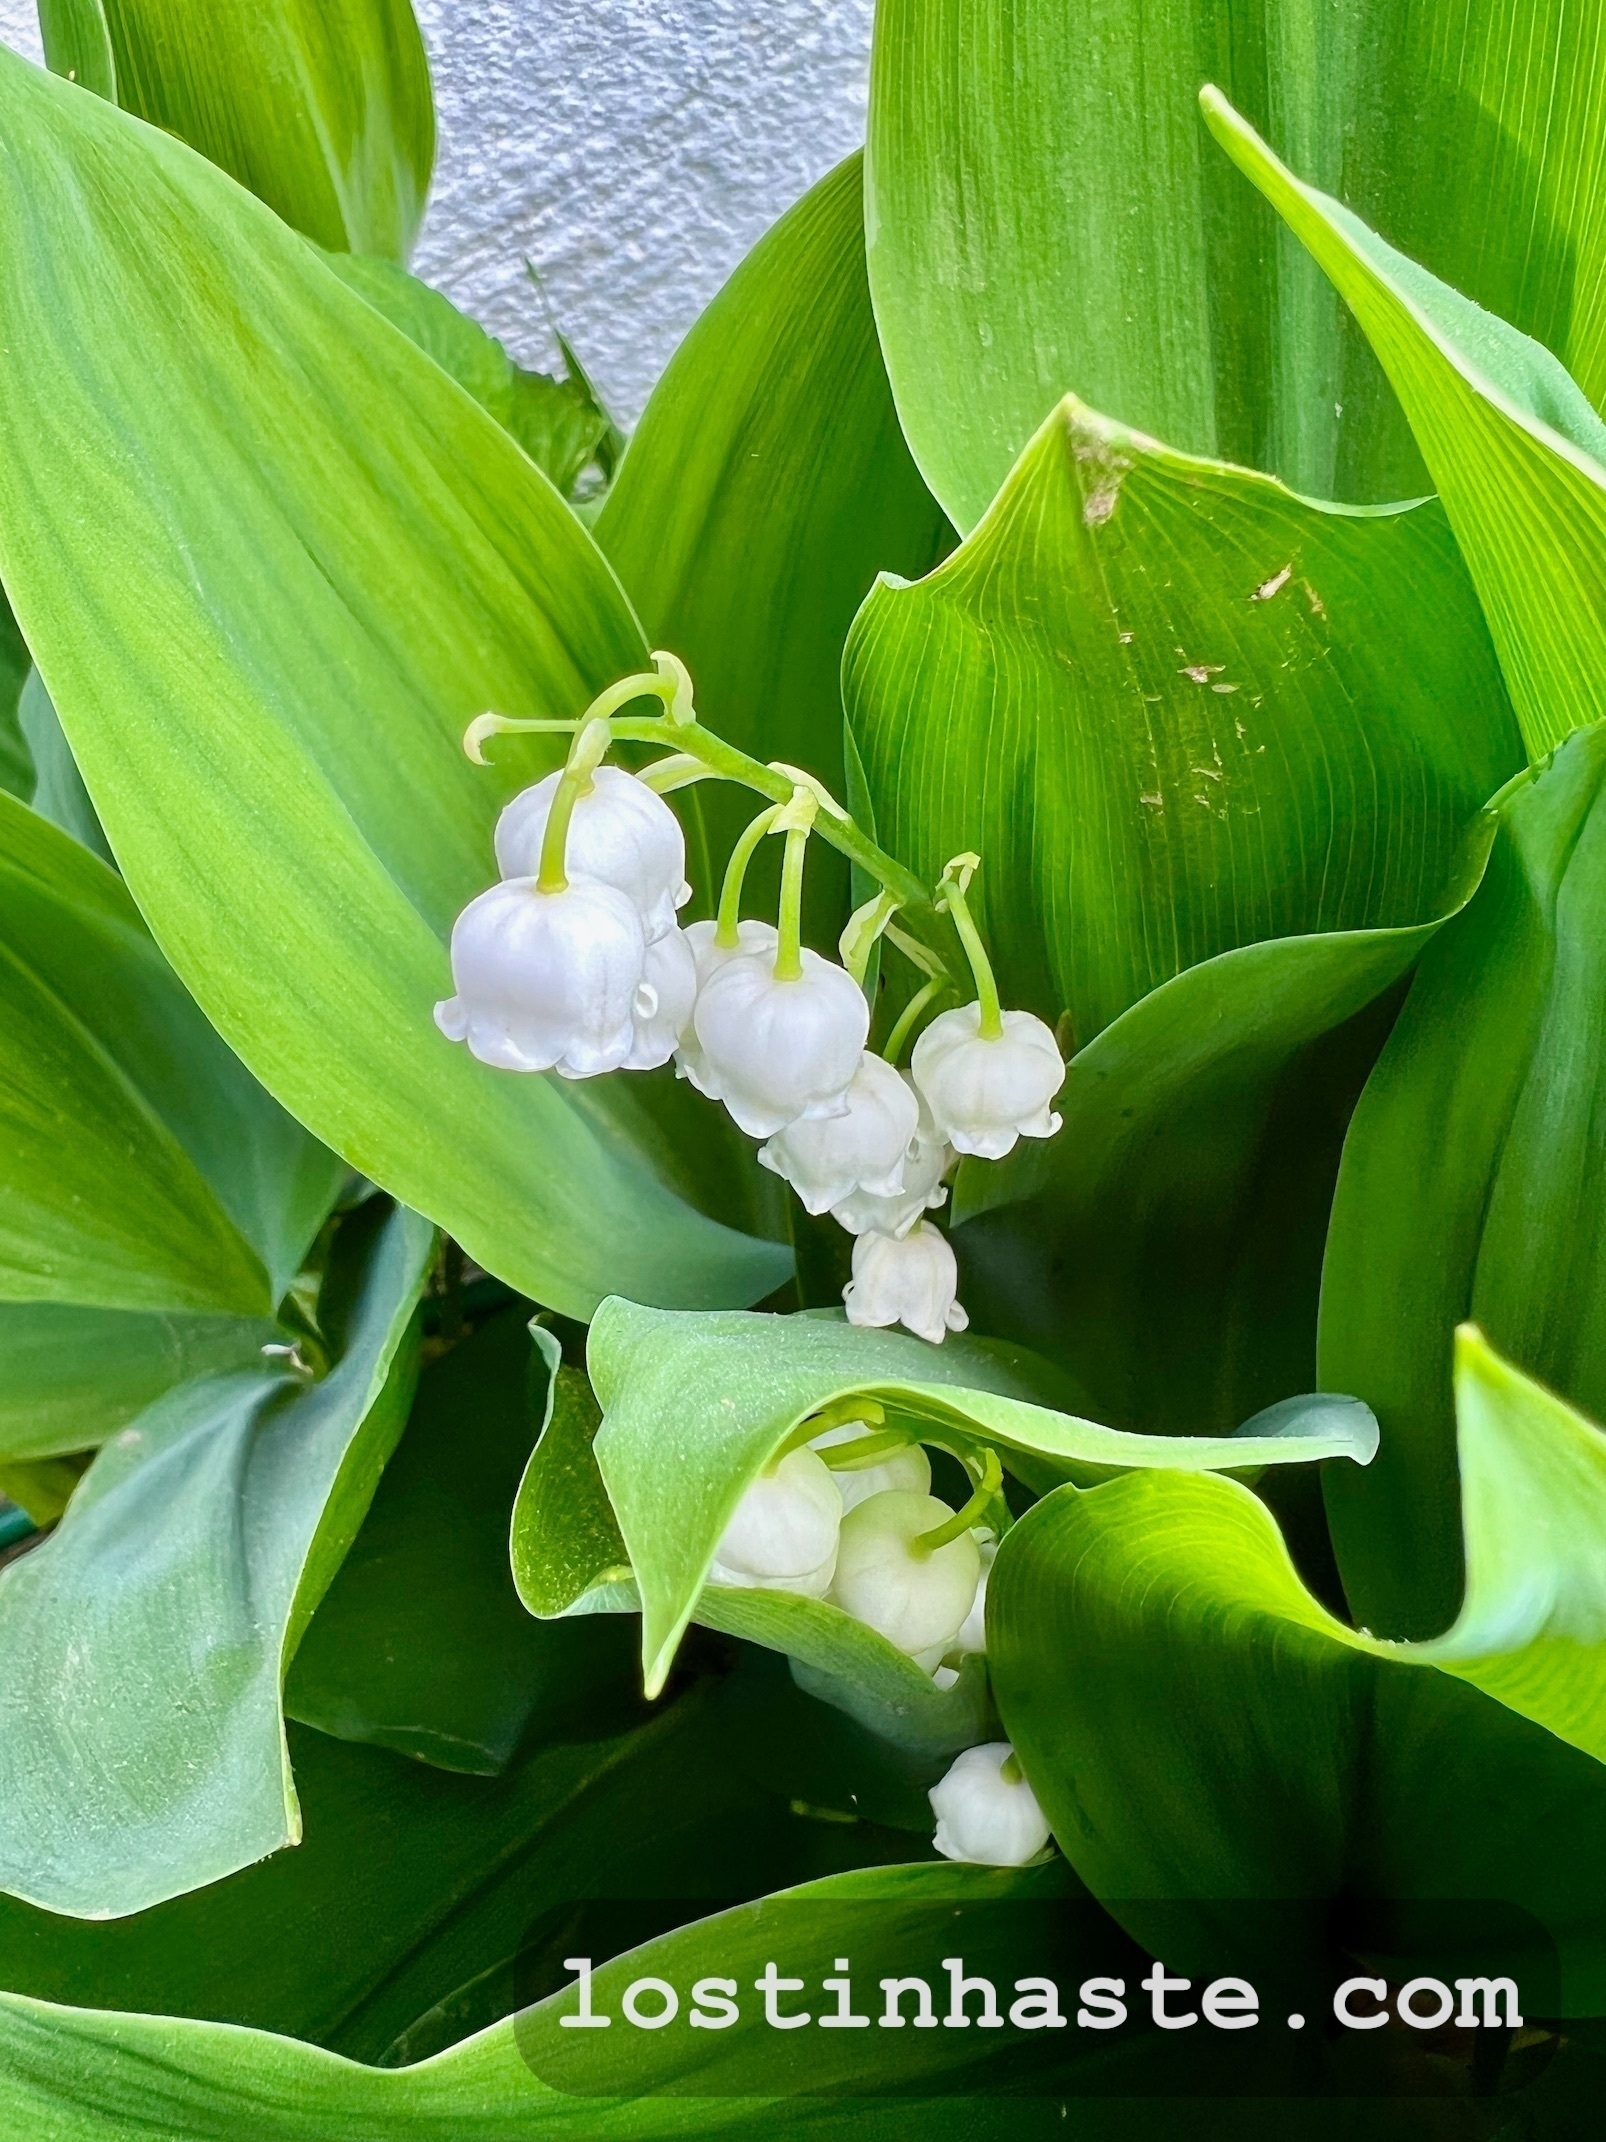 White bell-shaped flowers (lily of the valley) hanging from a curved stem amid broad green leaves; a white wall in the background.